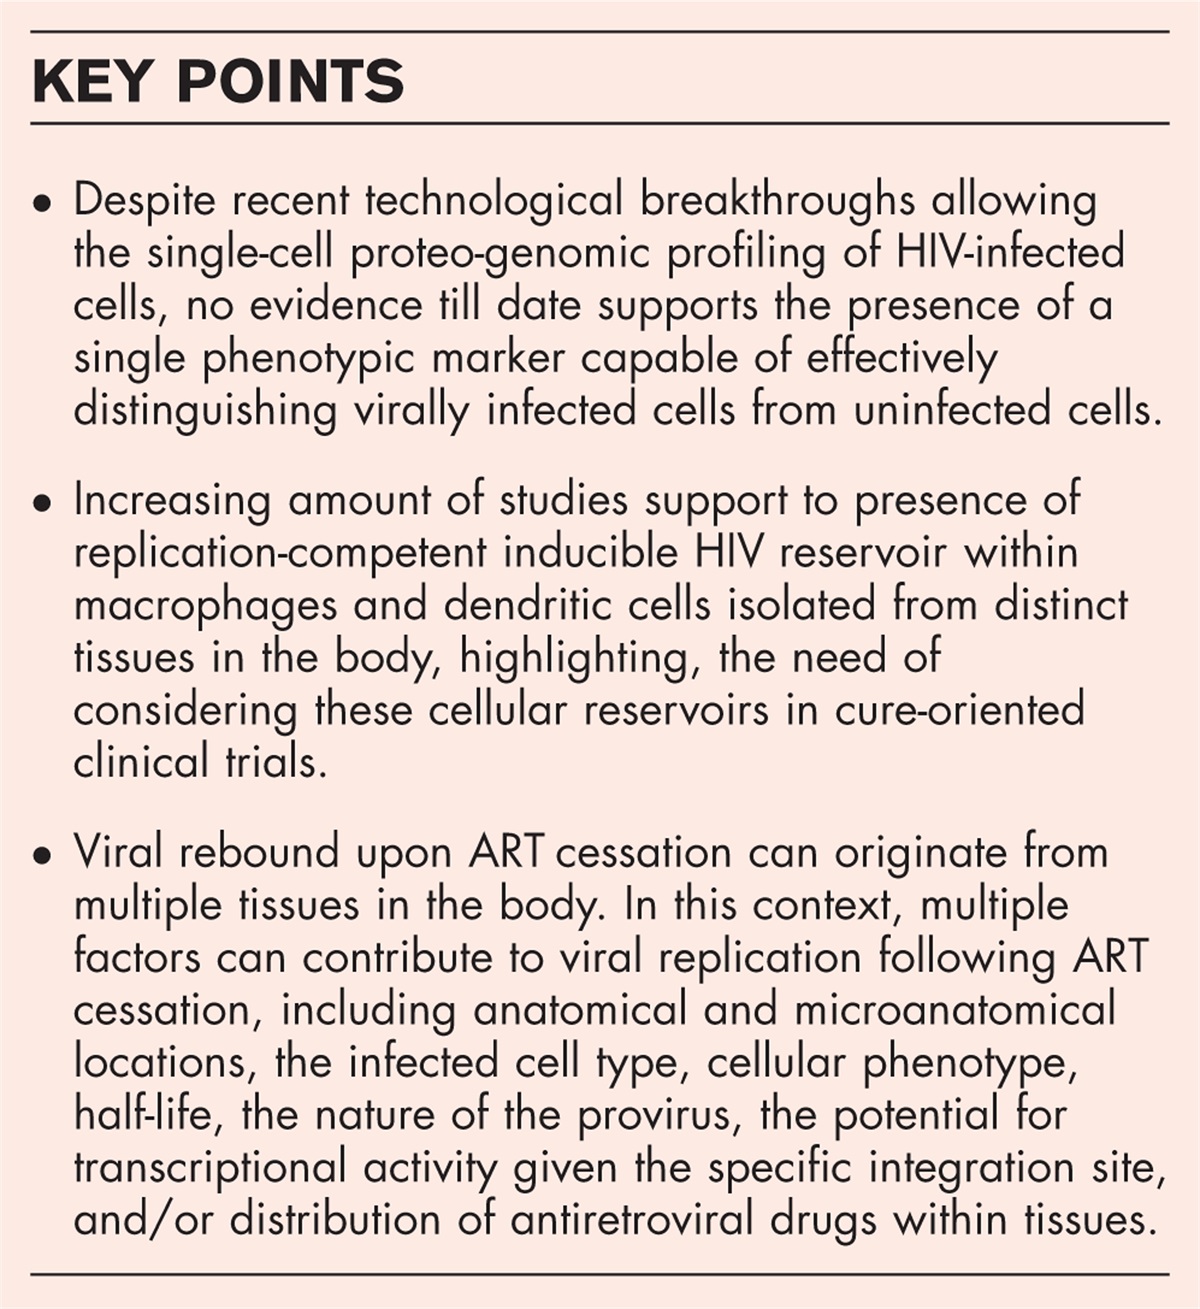 The multifaceted nature of HIV tissue reservoirs